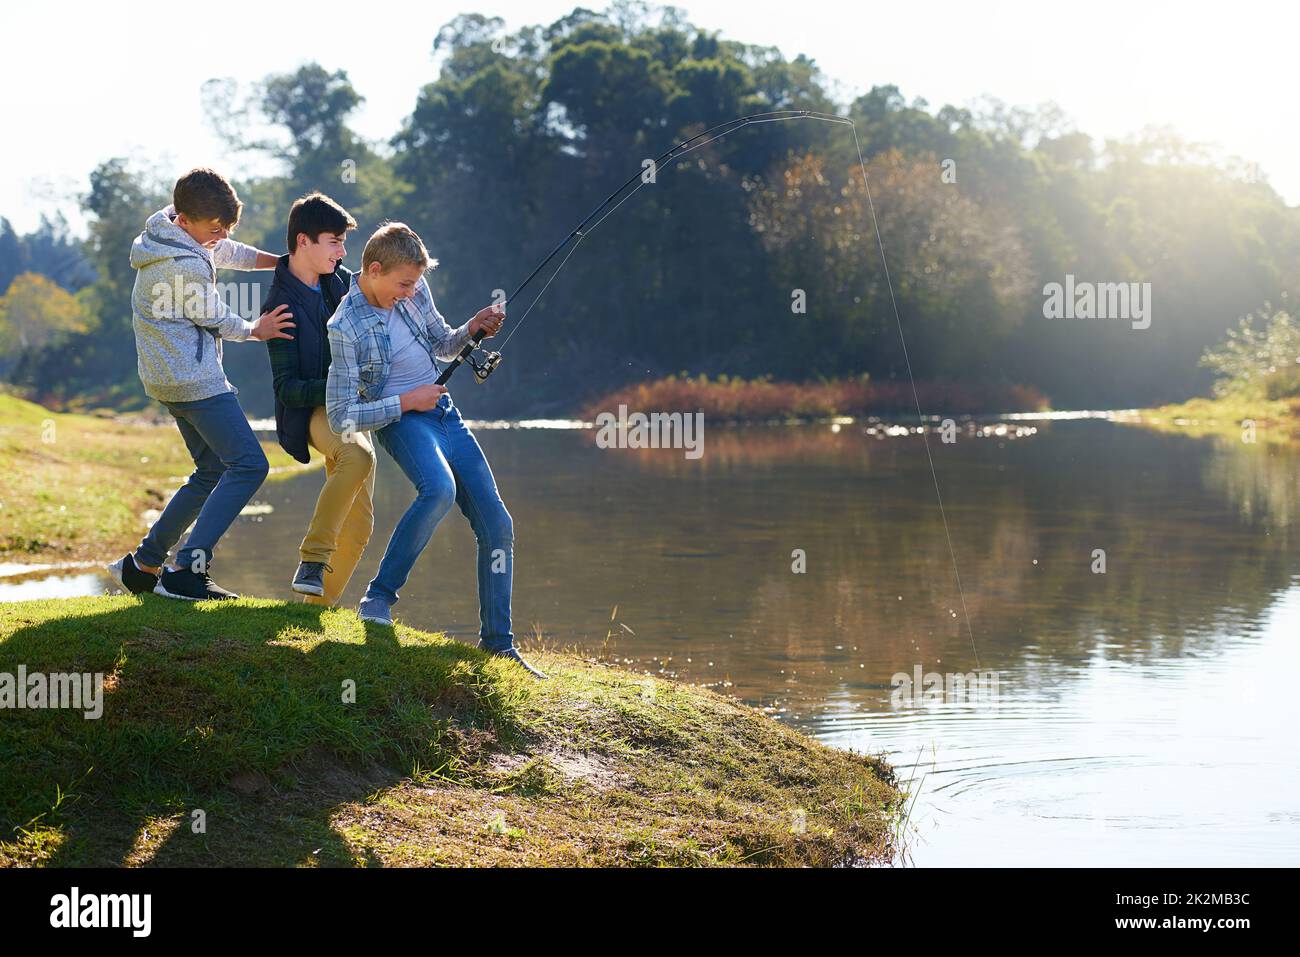 Its a big one. Shot of a group of young boys fishing by a lake. Stock Photo